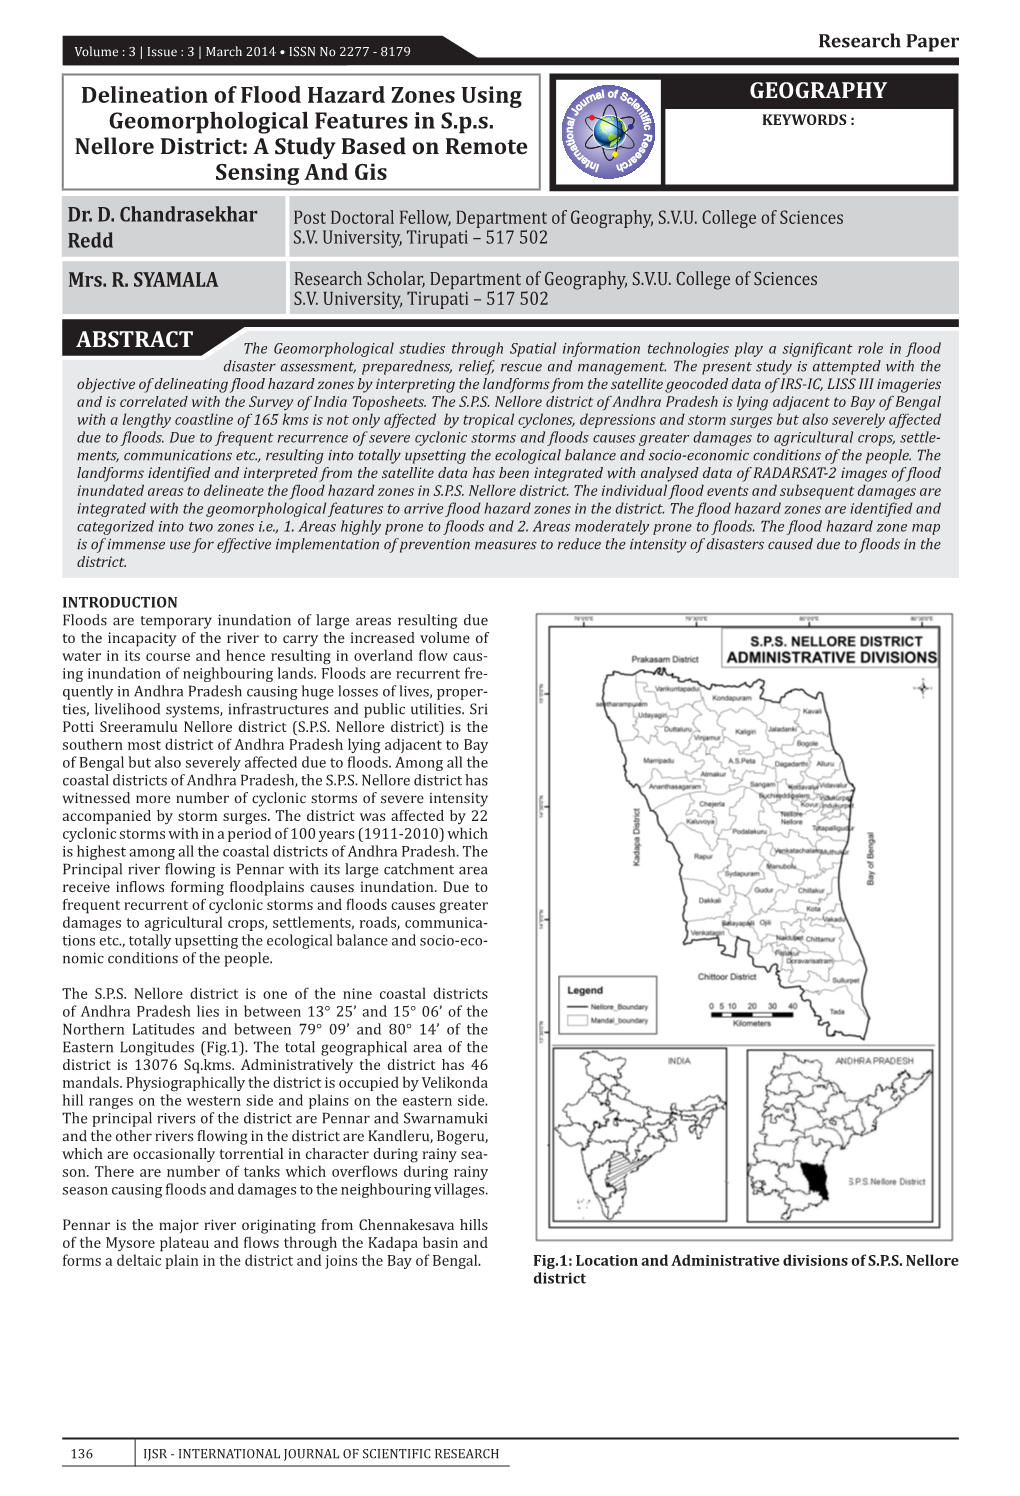 GEOGRAPHY ABSTRACT Delineation of Flood Hazard Zones